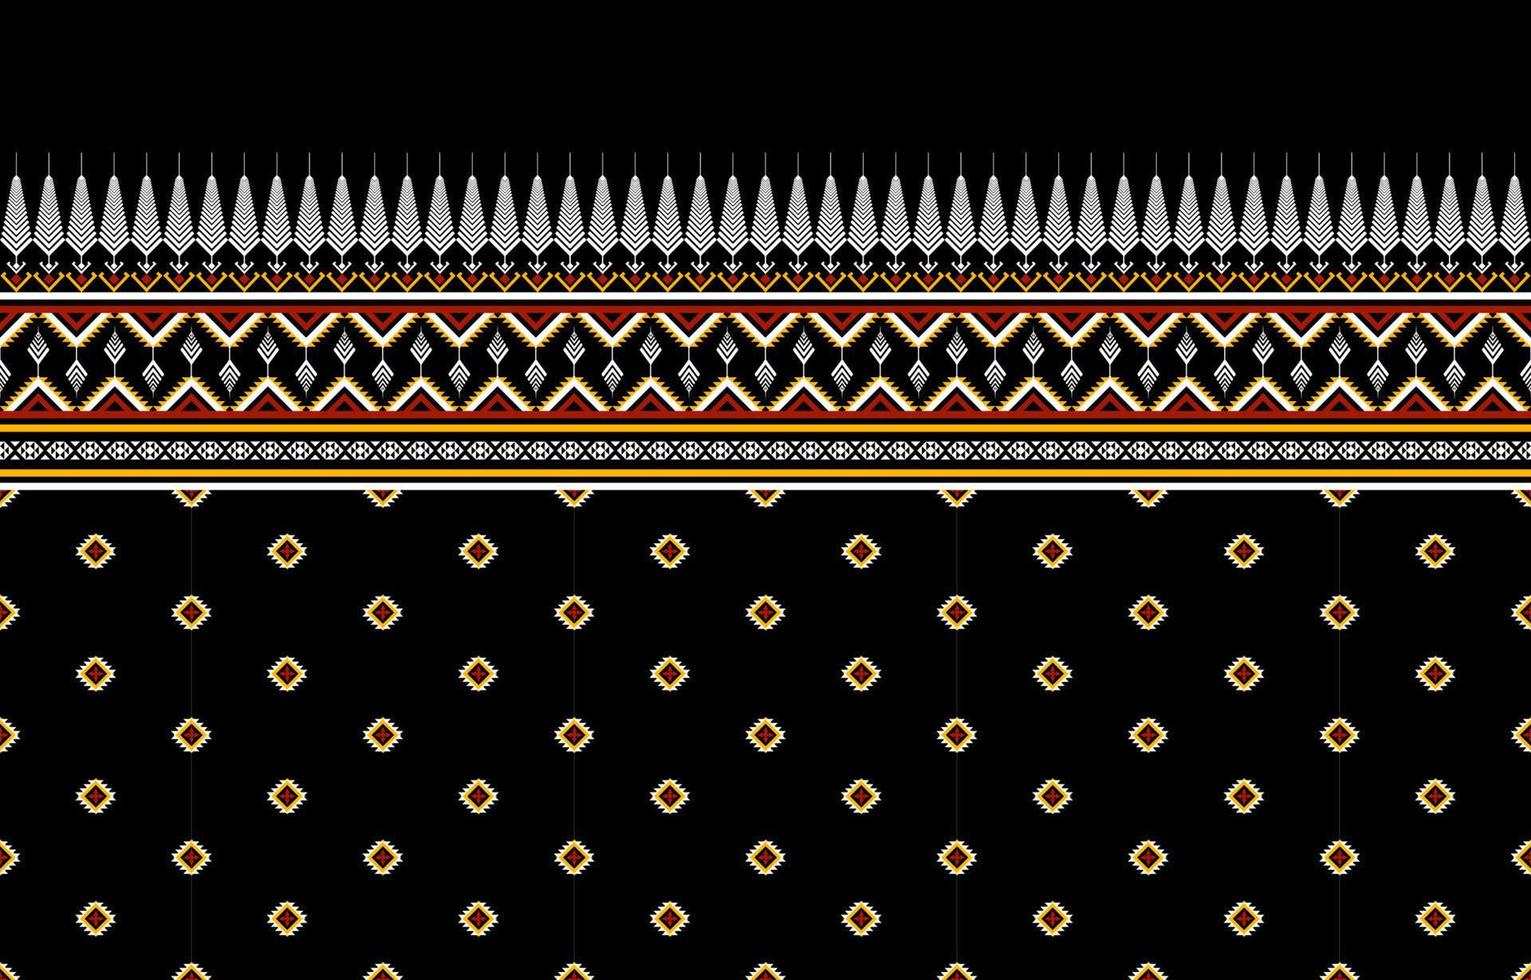 Geometric ethnic pattern traditional Design for background,carpet,wallpaper,clothing,wrapping,Batik,fabric,sarong,illustration,embroidery,style. vector